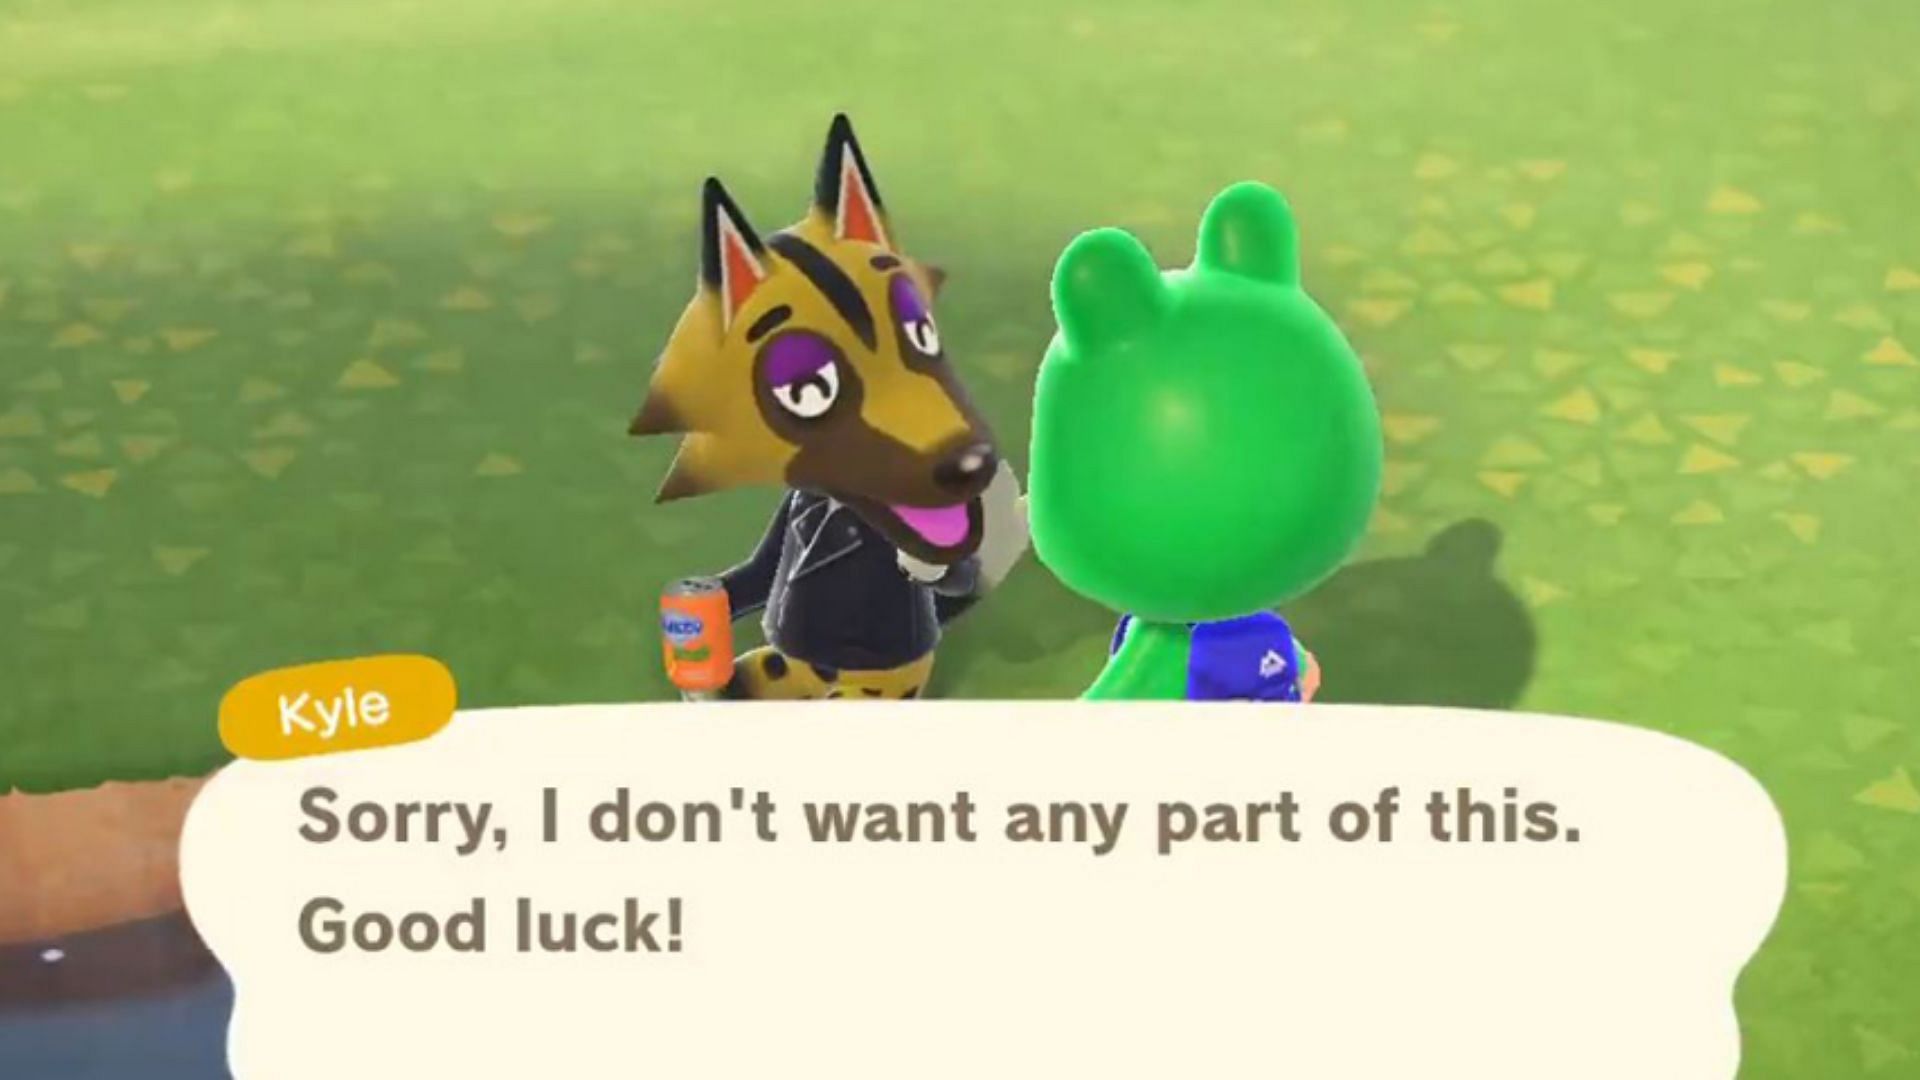 Weirdest things that take place in Animal Crossing: New Horizons (Image via Paste Magazine)